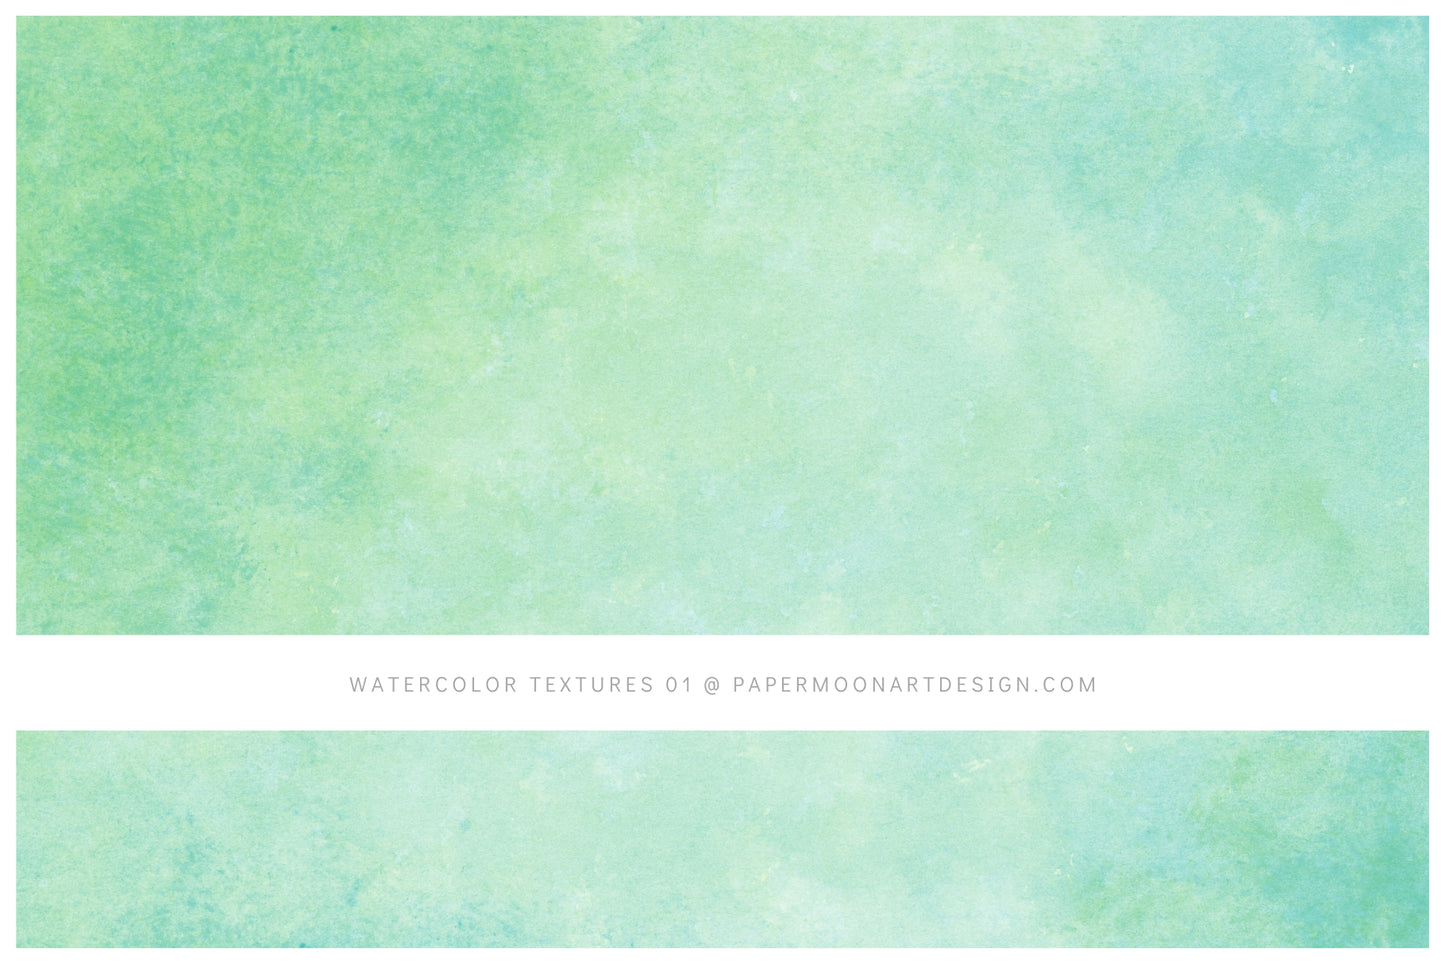 Watercolor Texture Backgrounds 01 Green and Blue Watercolor Textures